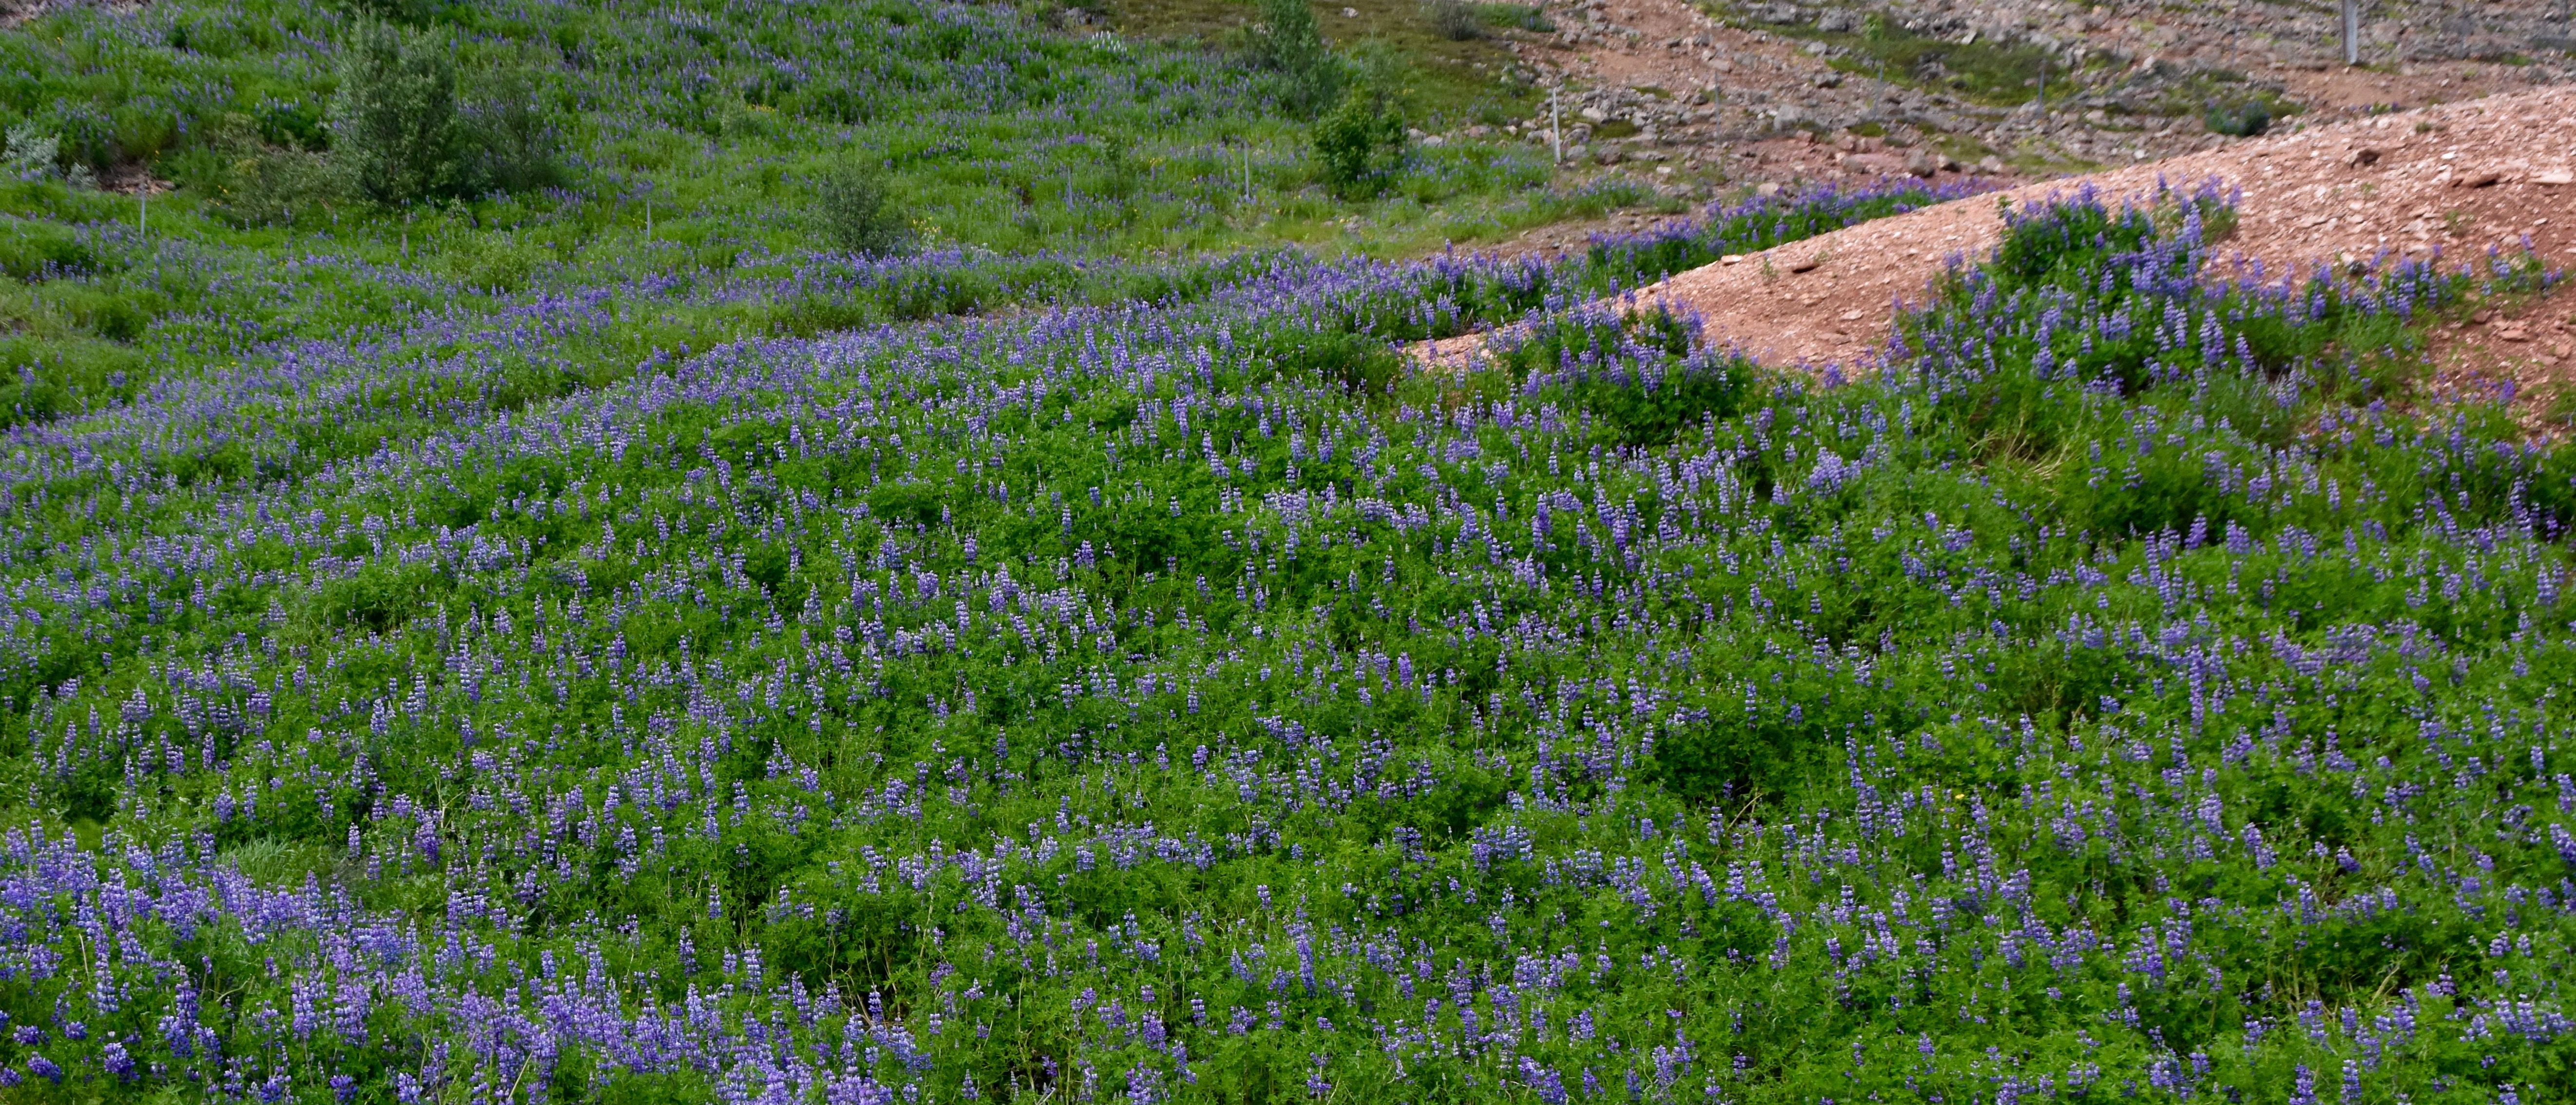 Lupins on the Golden Circle Route